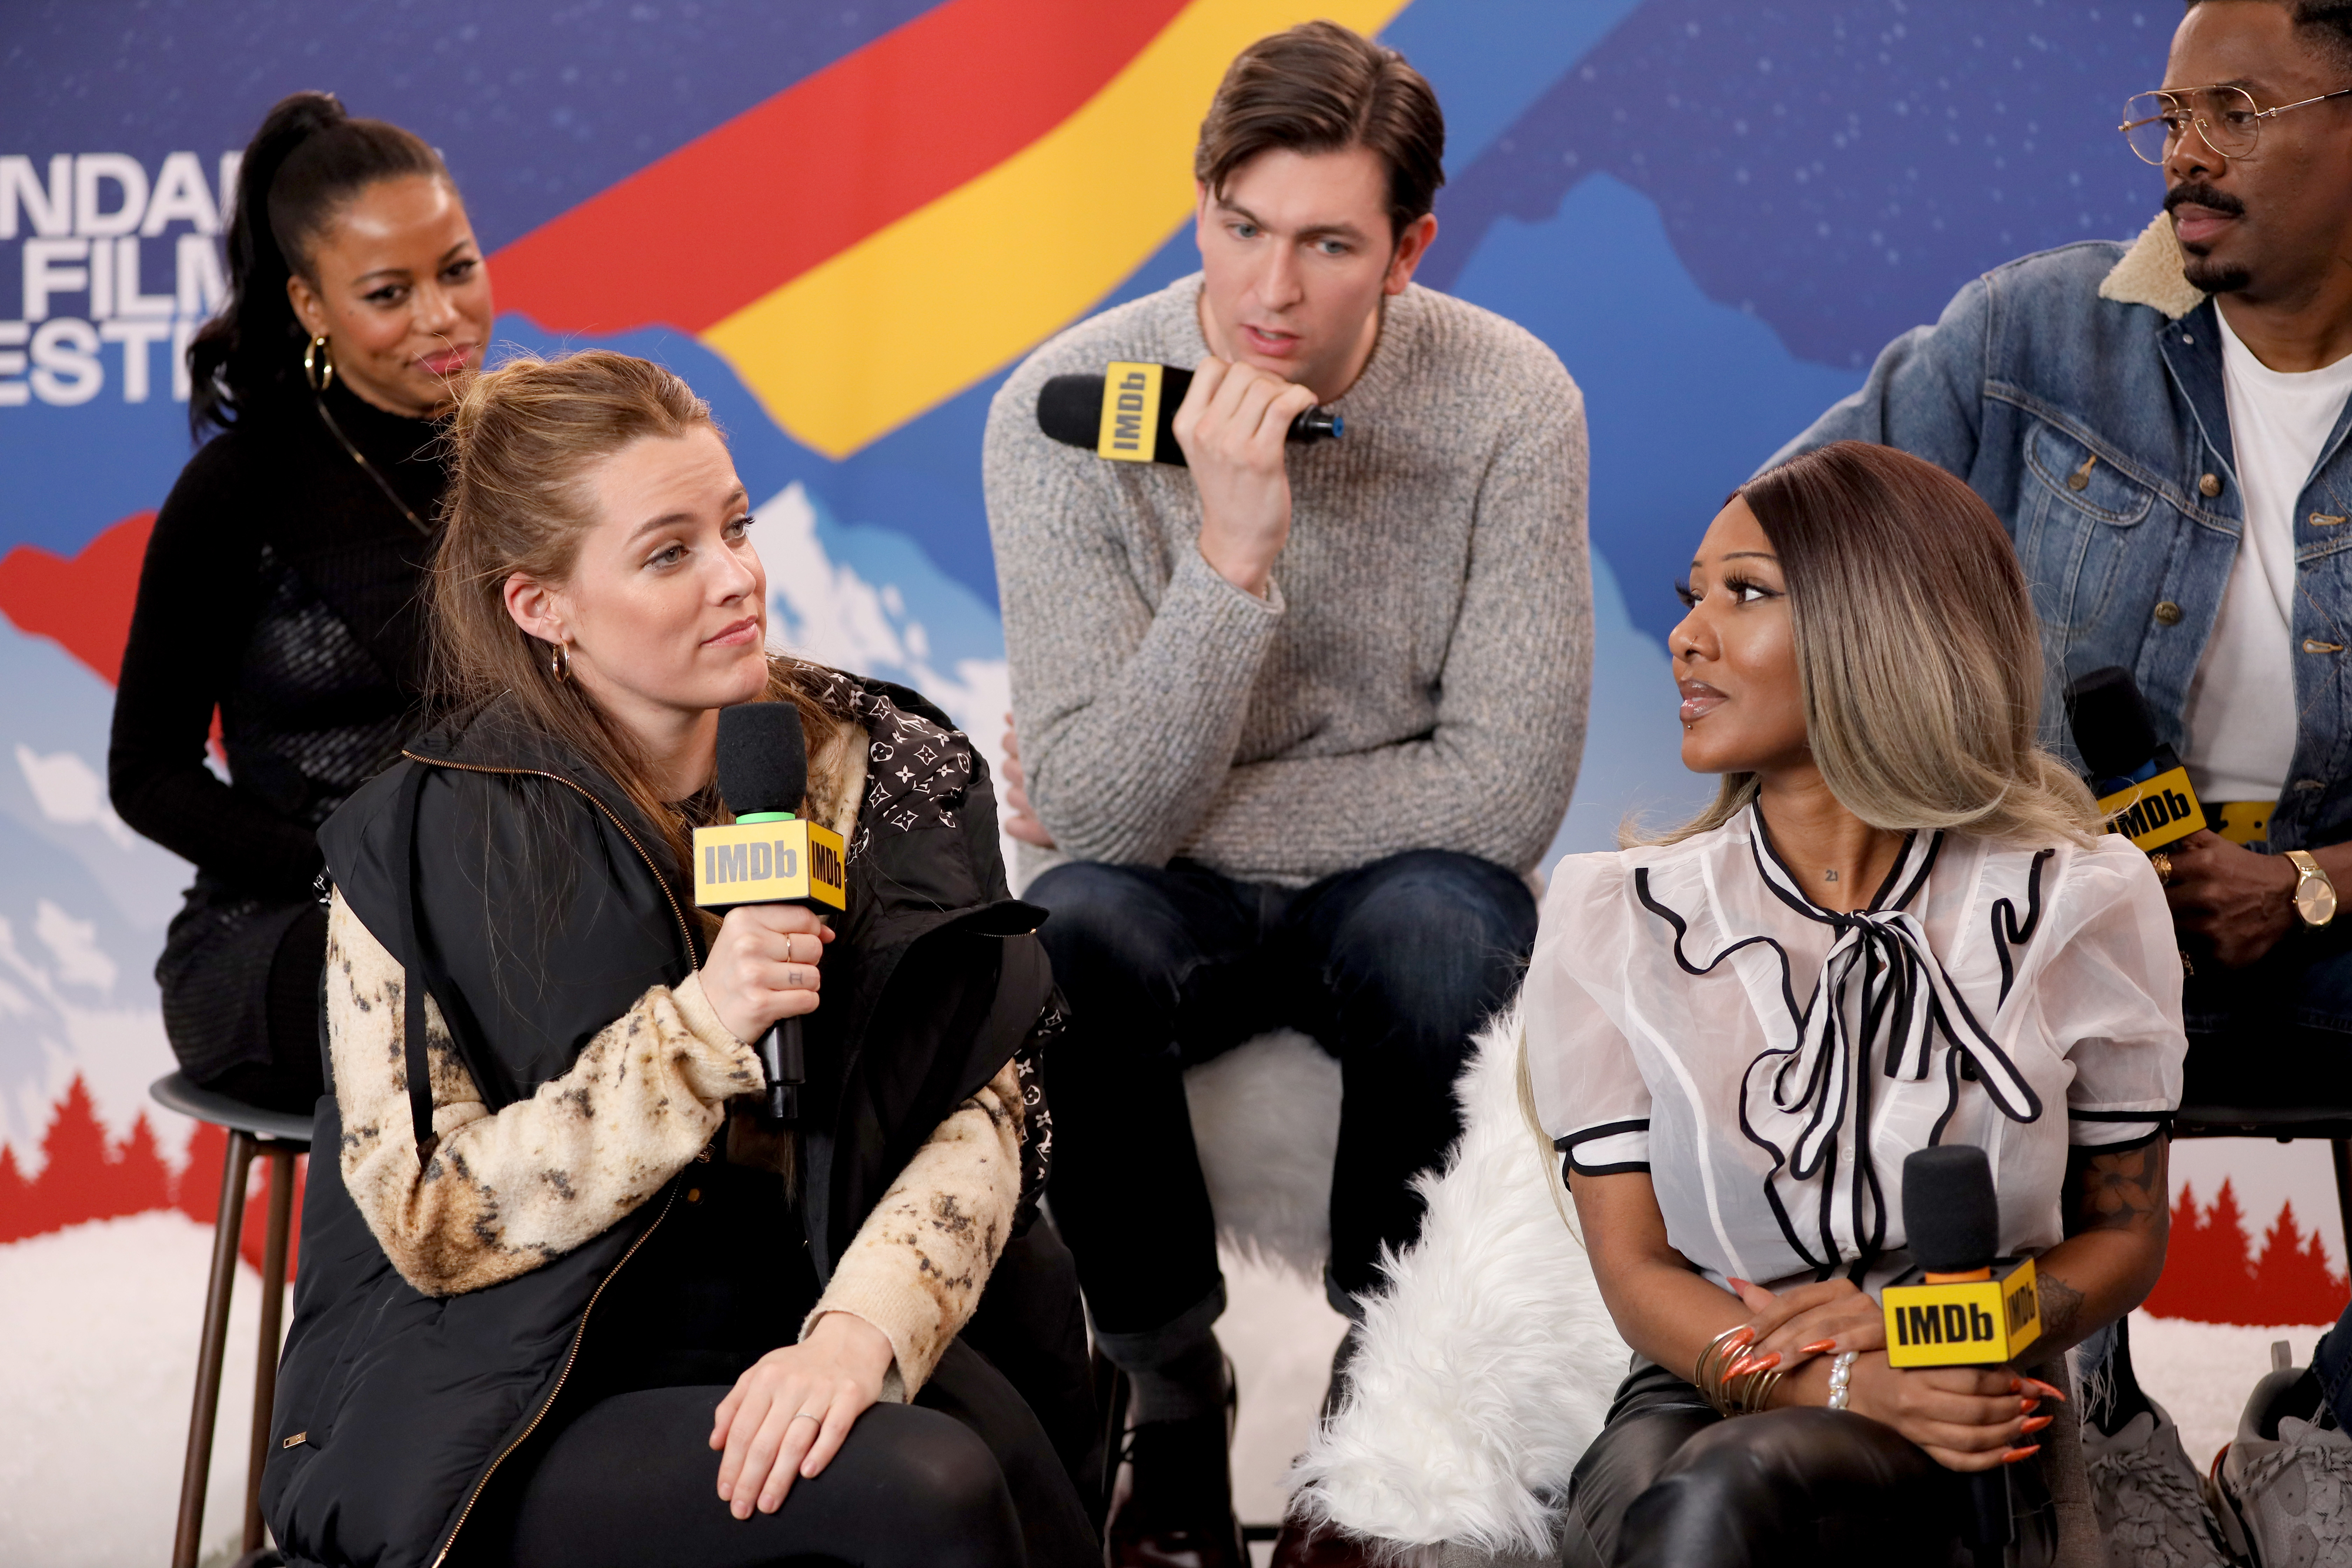 Cast members of Zola being interviewed